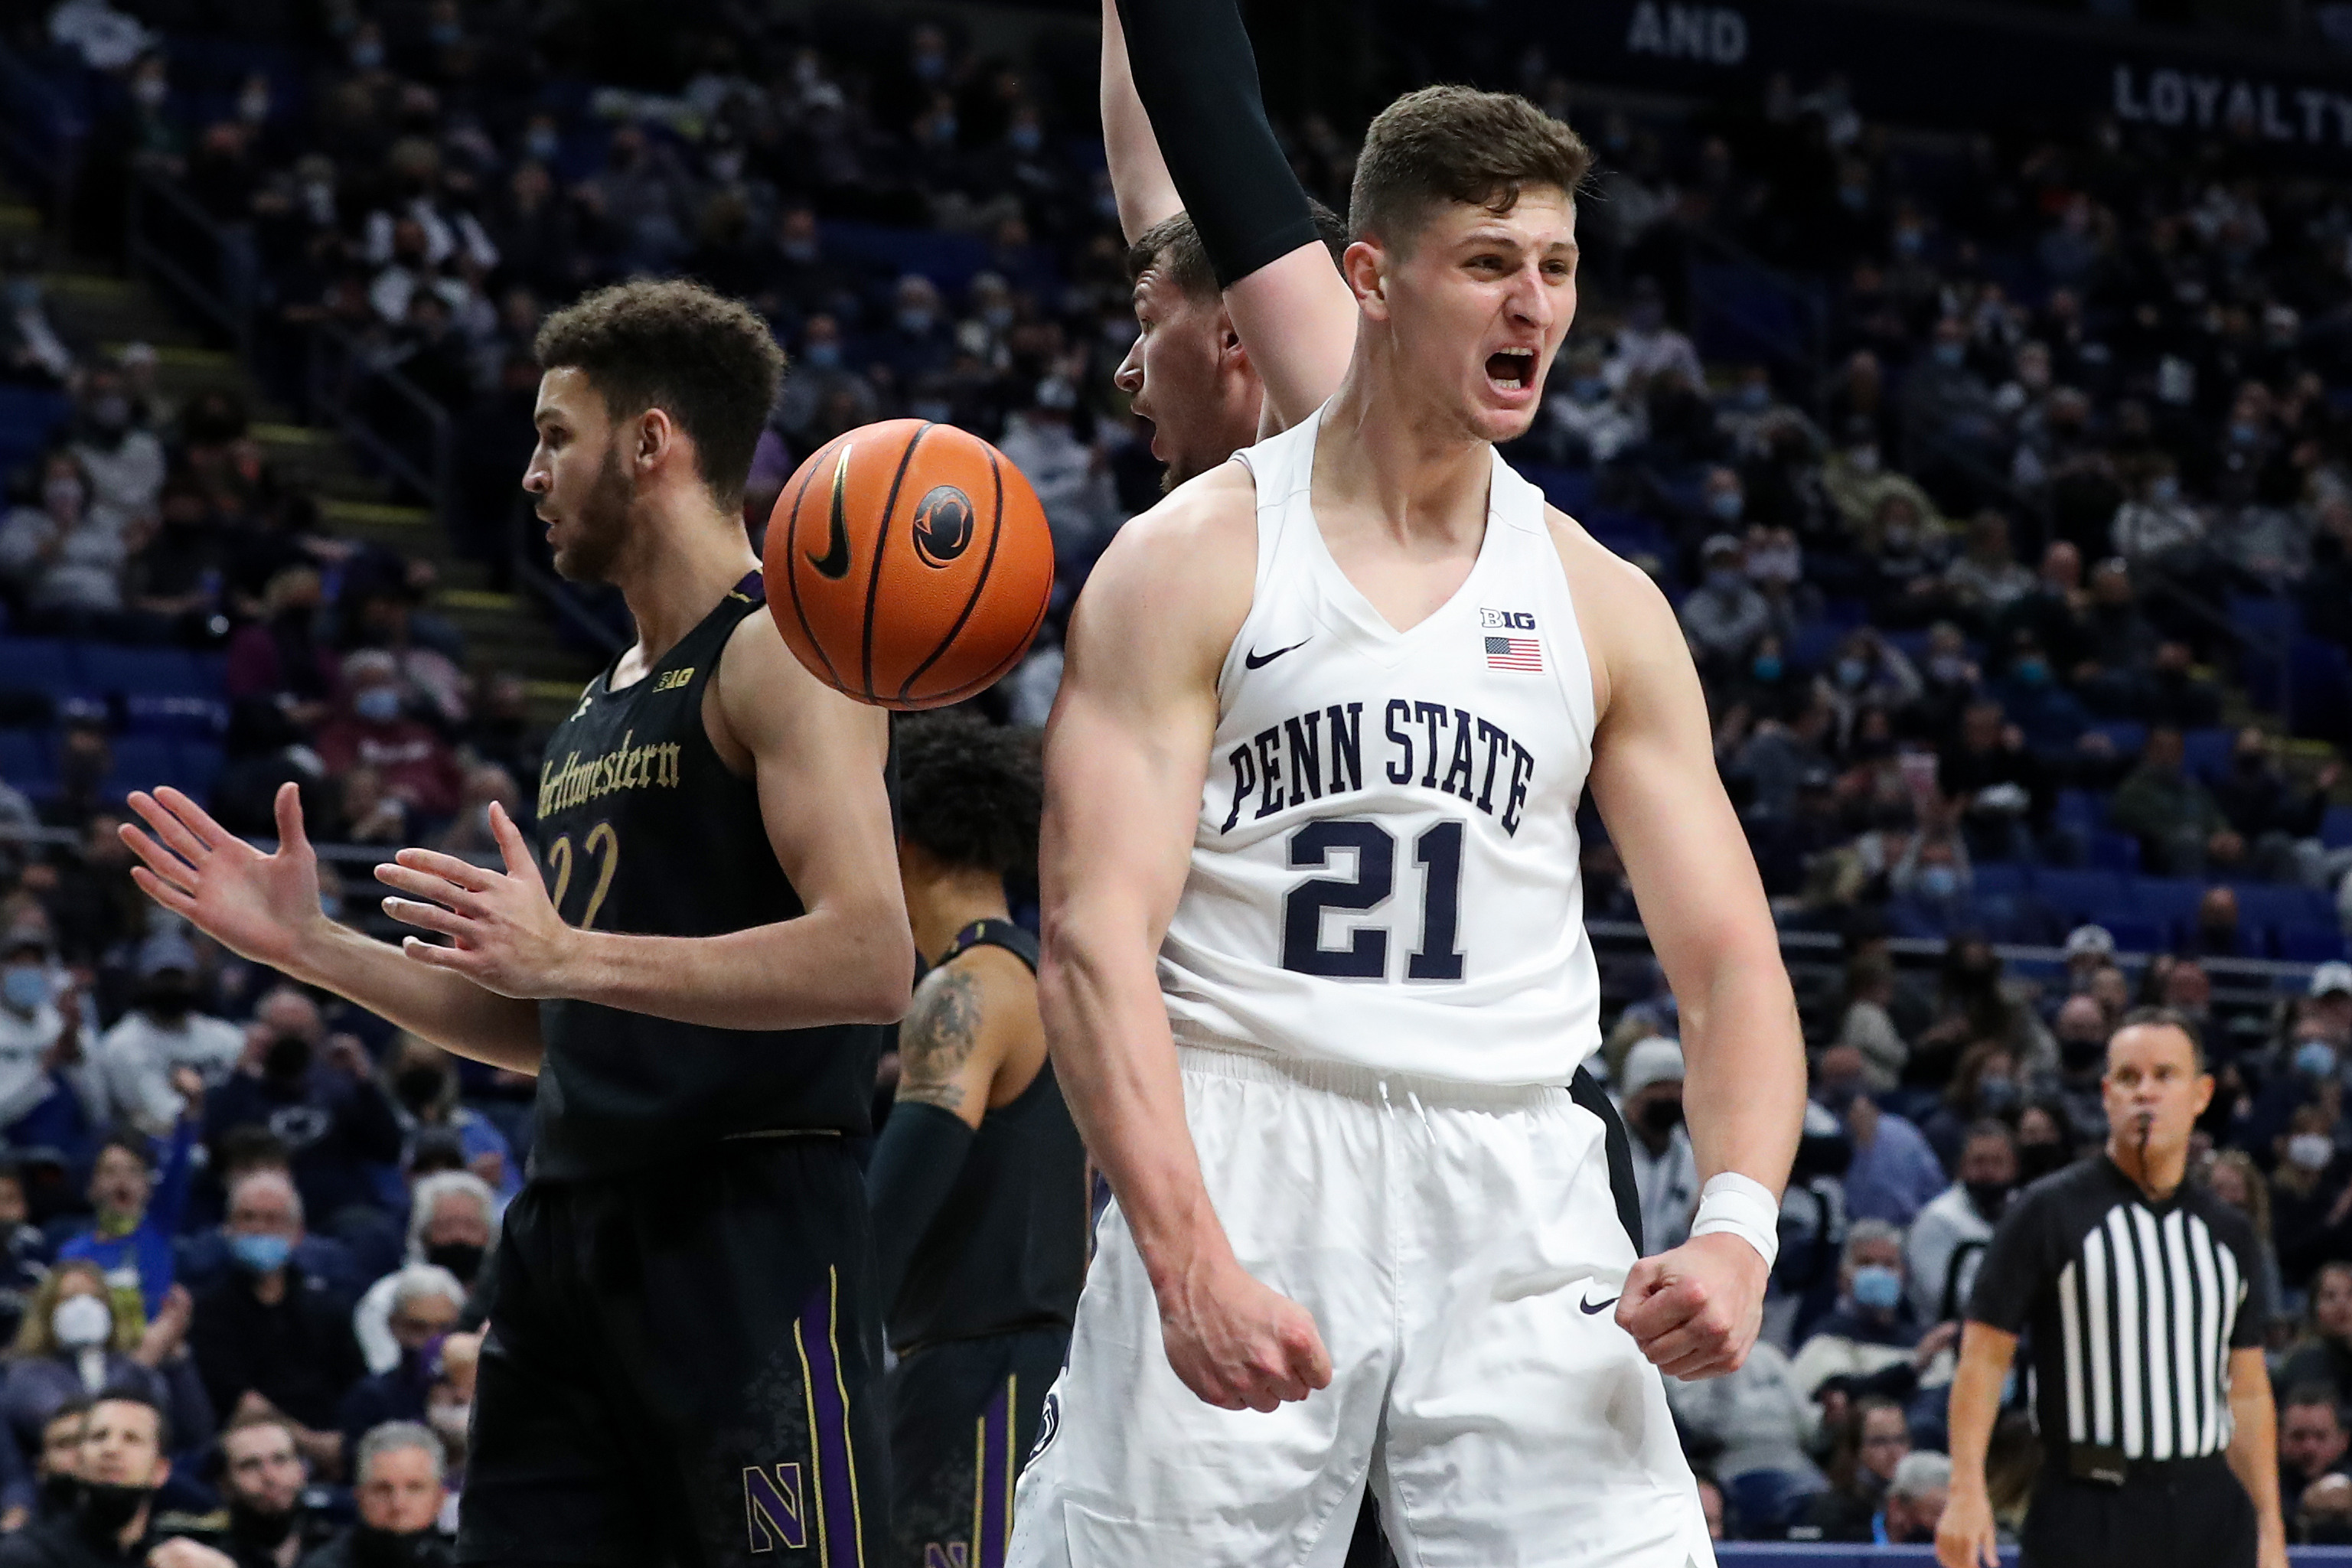 Penn State Nittany Lions forward John Harrar (21) reacts after being fouled during the first half against the Northwestern Wildcats at Bryce Jordan Center.